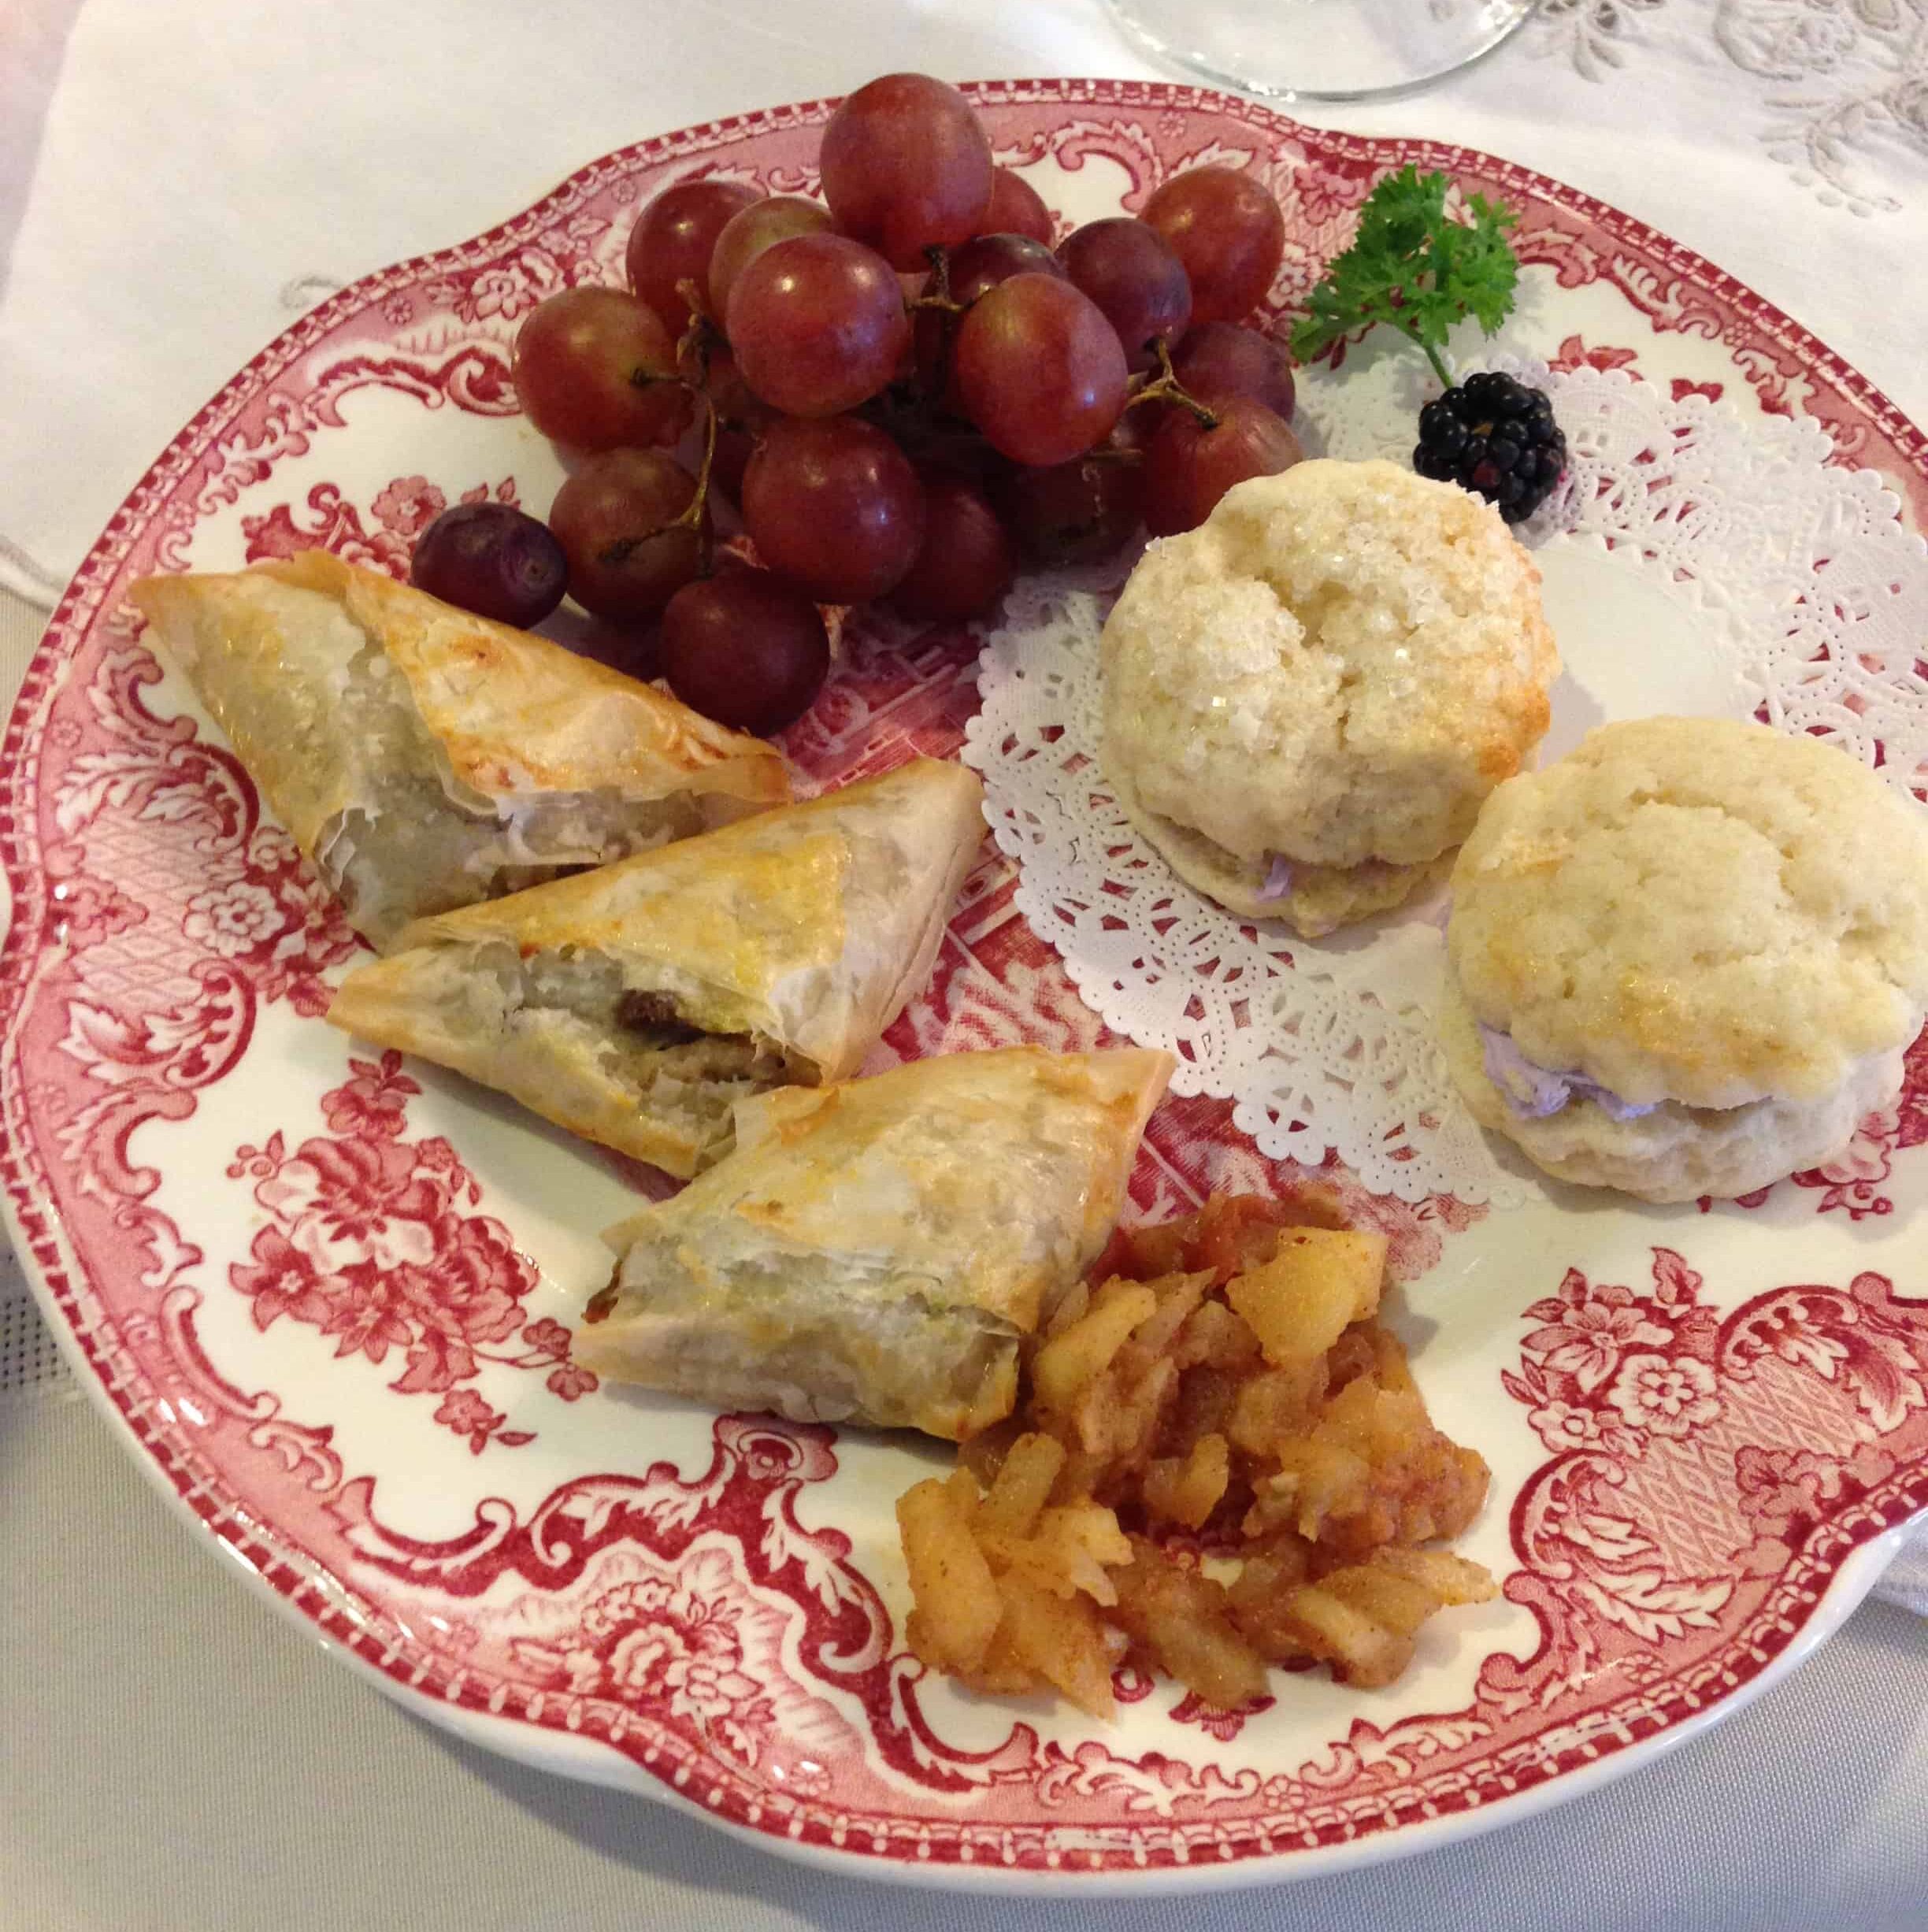 Scones at the Dusty Rose Tea Room